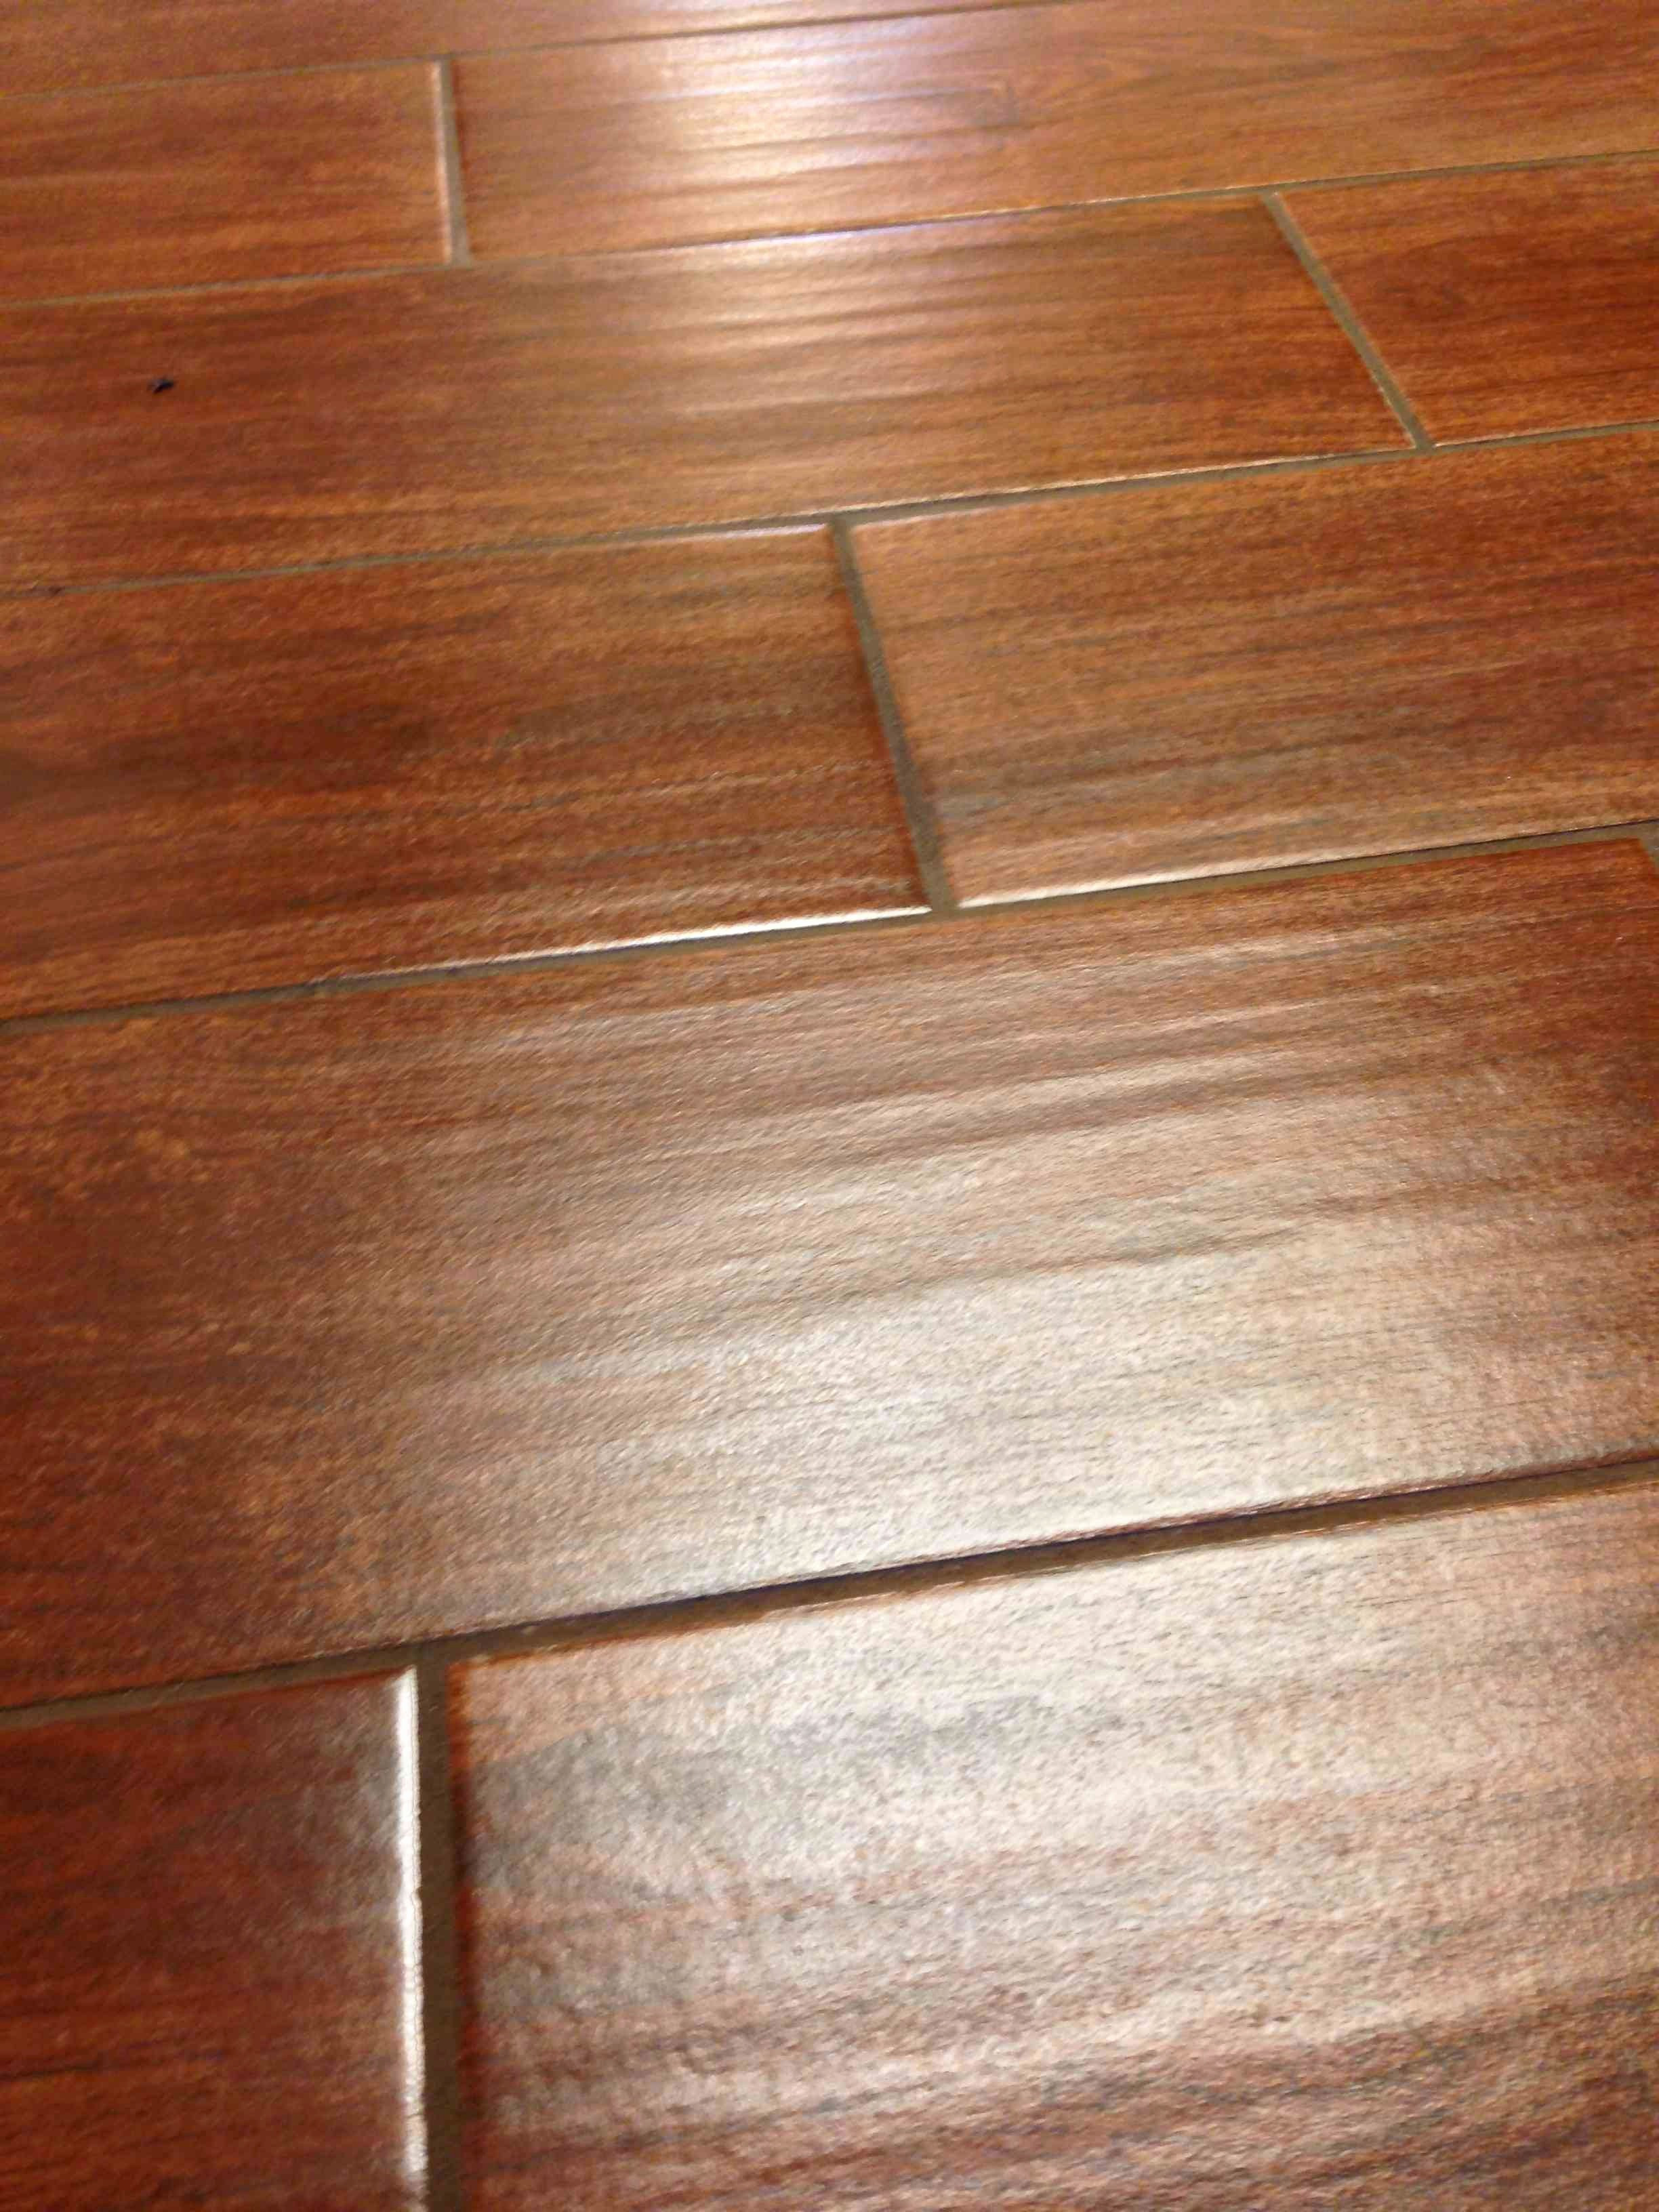 16 Spectacular How to Fix Gouges In Hardwood Floors 2024 free download how to fix gouges in hardwood floors of 13 luxury repair hardwood floor collection dizpos com for repair hardwood floor unique wood floor store stock of 13 luxury repair hardwood floor colle